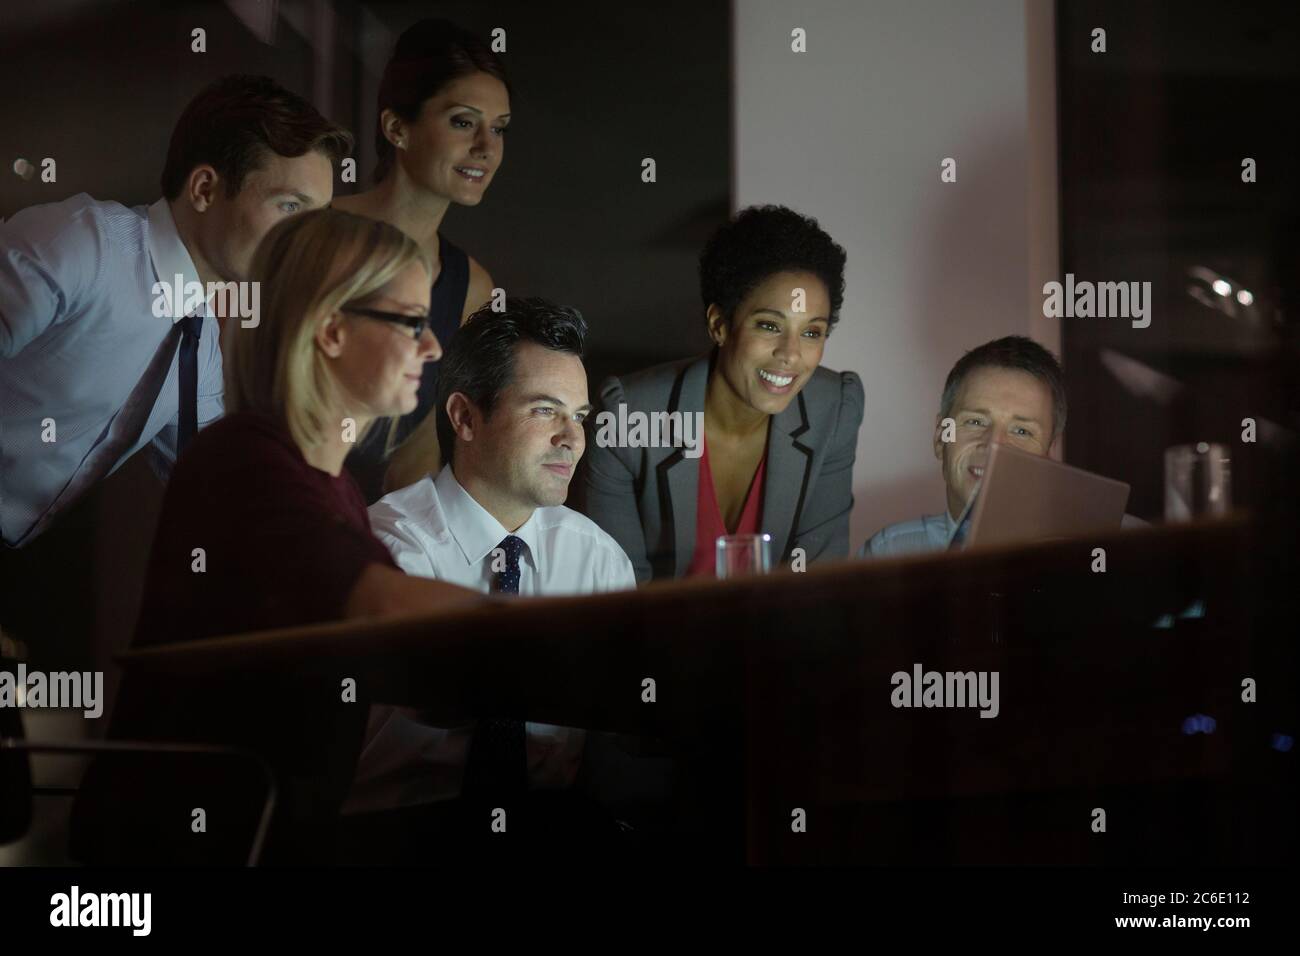 Business people working at laptop in conference room at night Stock Photo